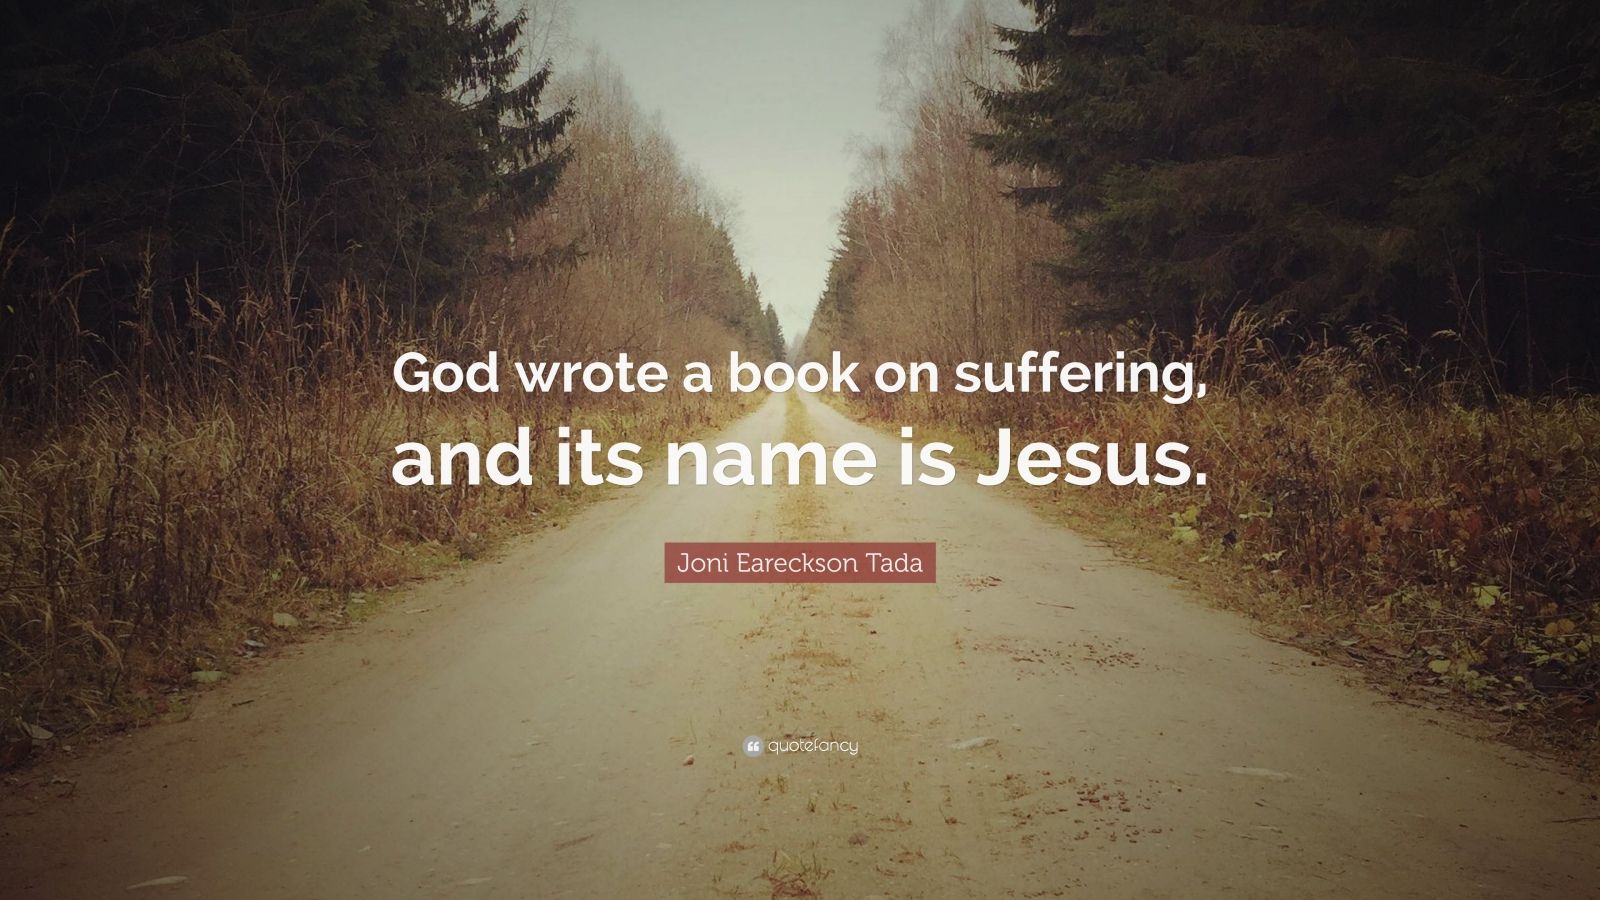 Joni Eareckson Tada Quote: “God wrote a book on suffering, and its name ...